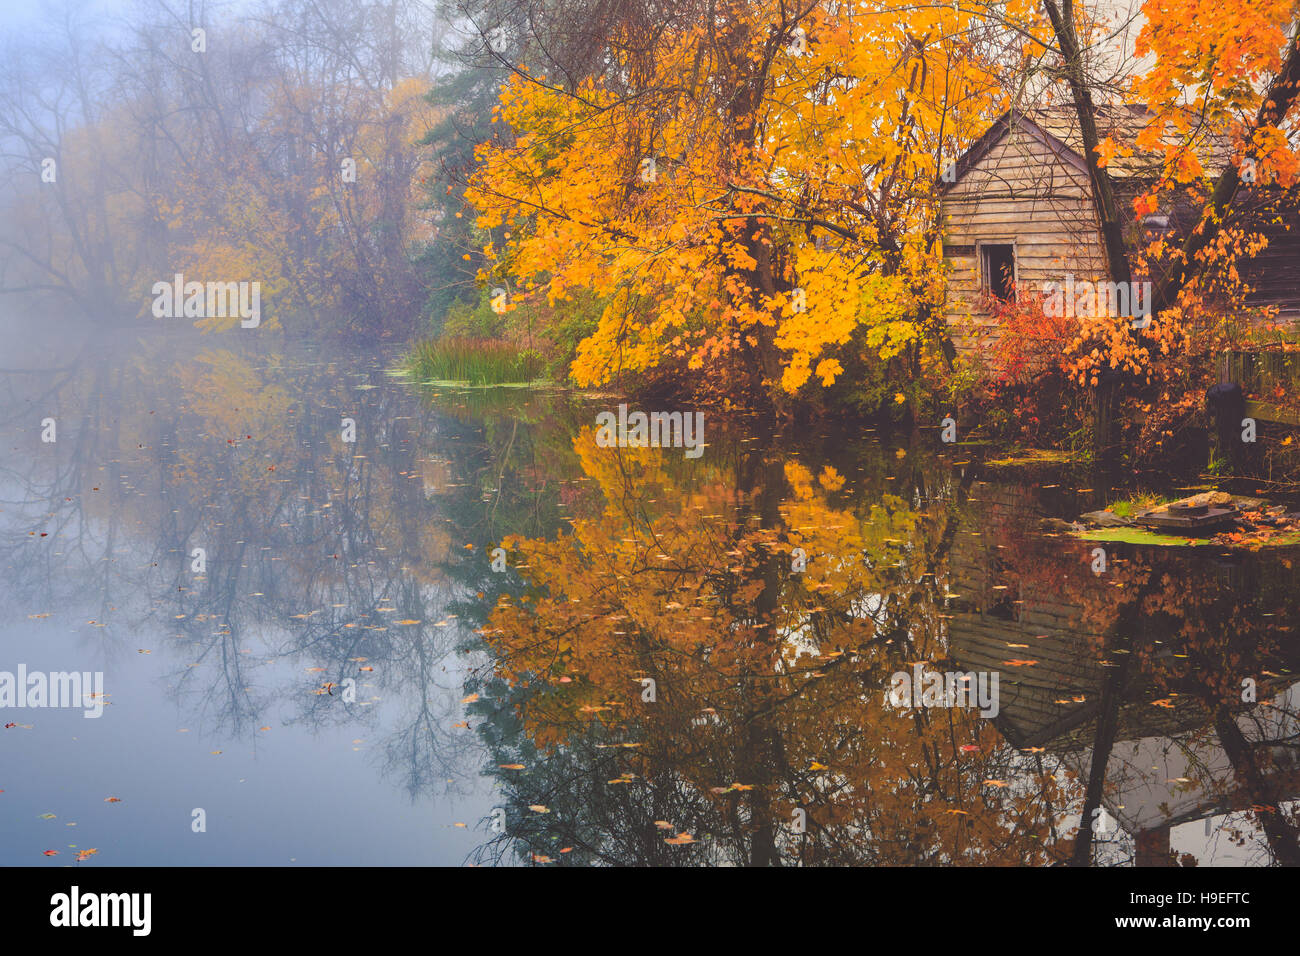 An old canal house on the Delaware and Raritan Canal reflects on a calm autumn morning. Stock Photo